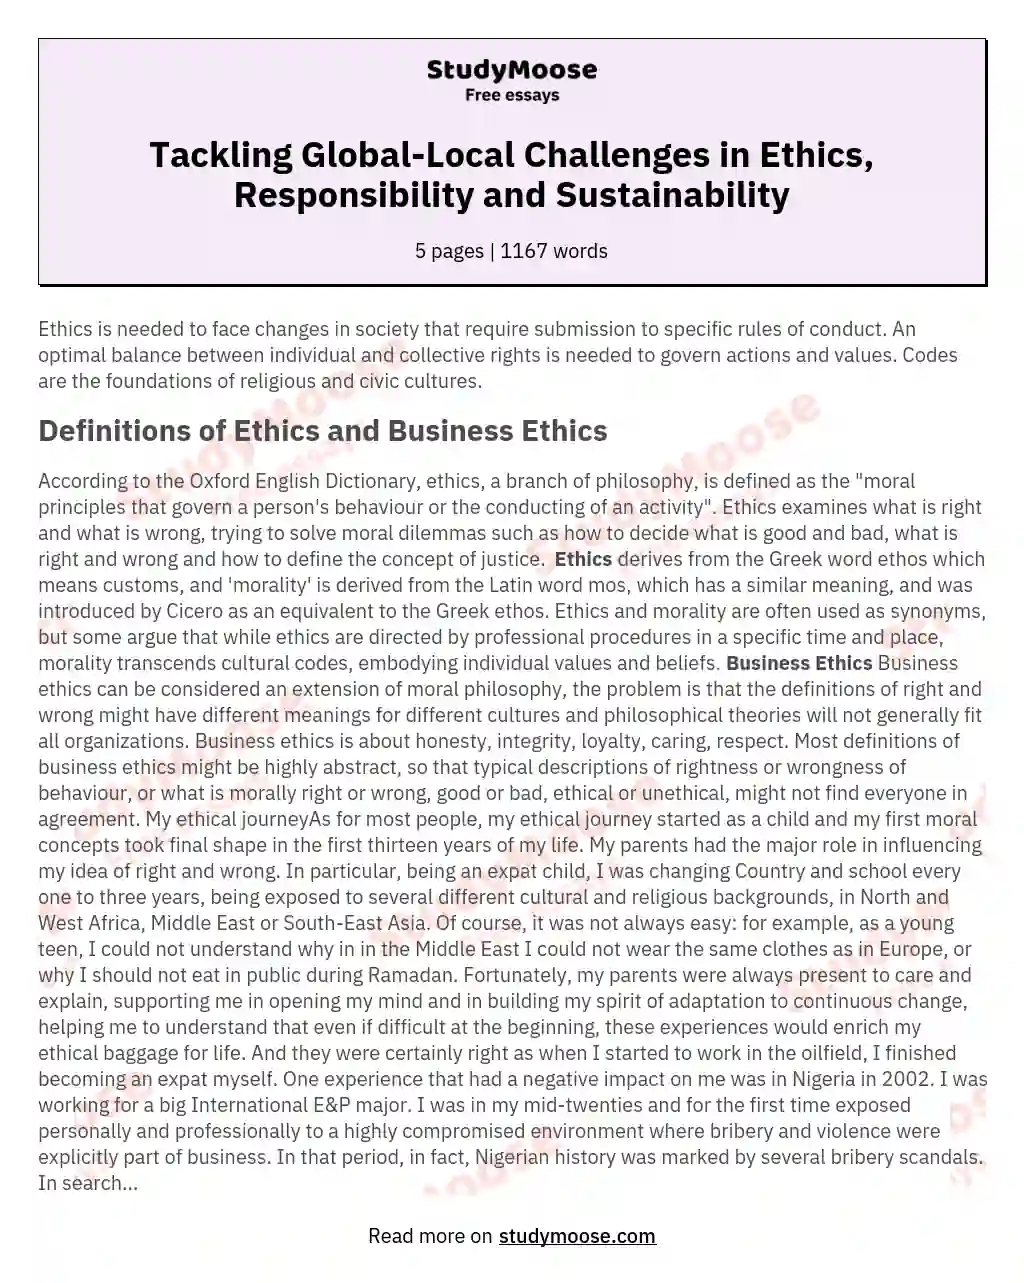 Tackling Global-Local Challenges in Ethics, Responsibility and Sustainability essay